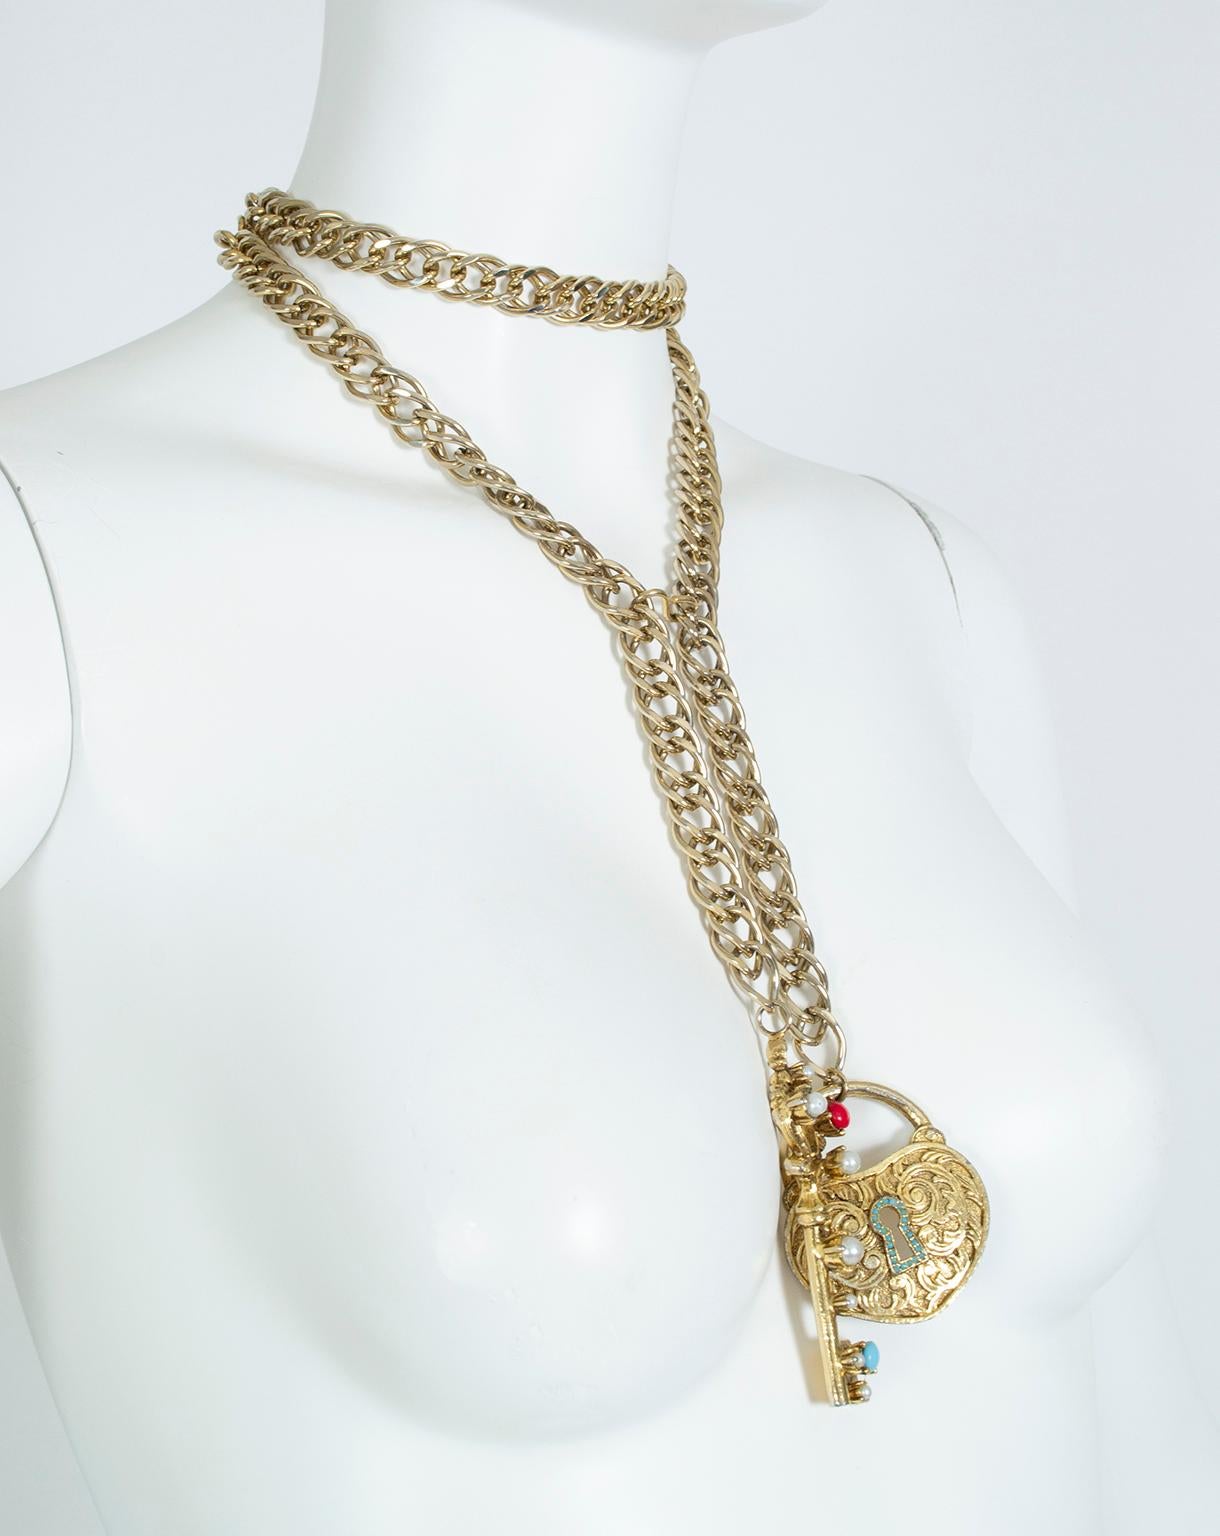 Pauline Rader Gold Lock and Key to My Heart Chain Belt Necklace – XS-S, 1960s For Sale 4